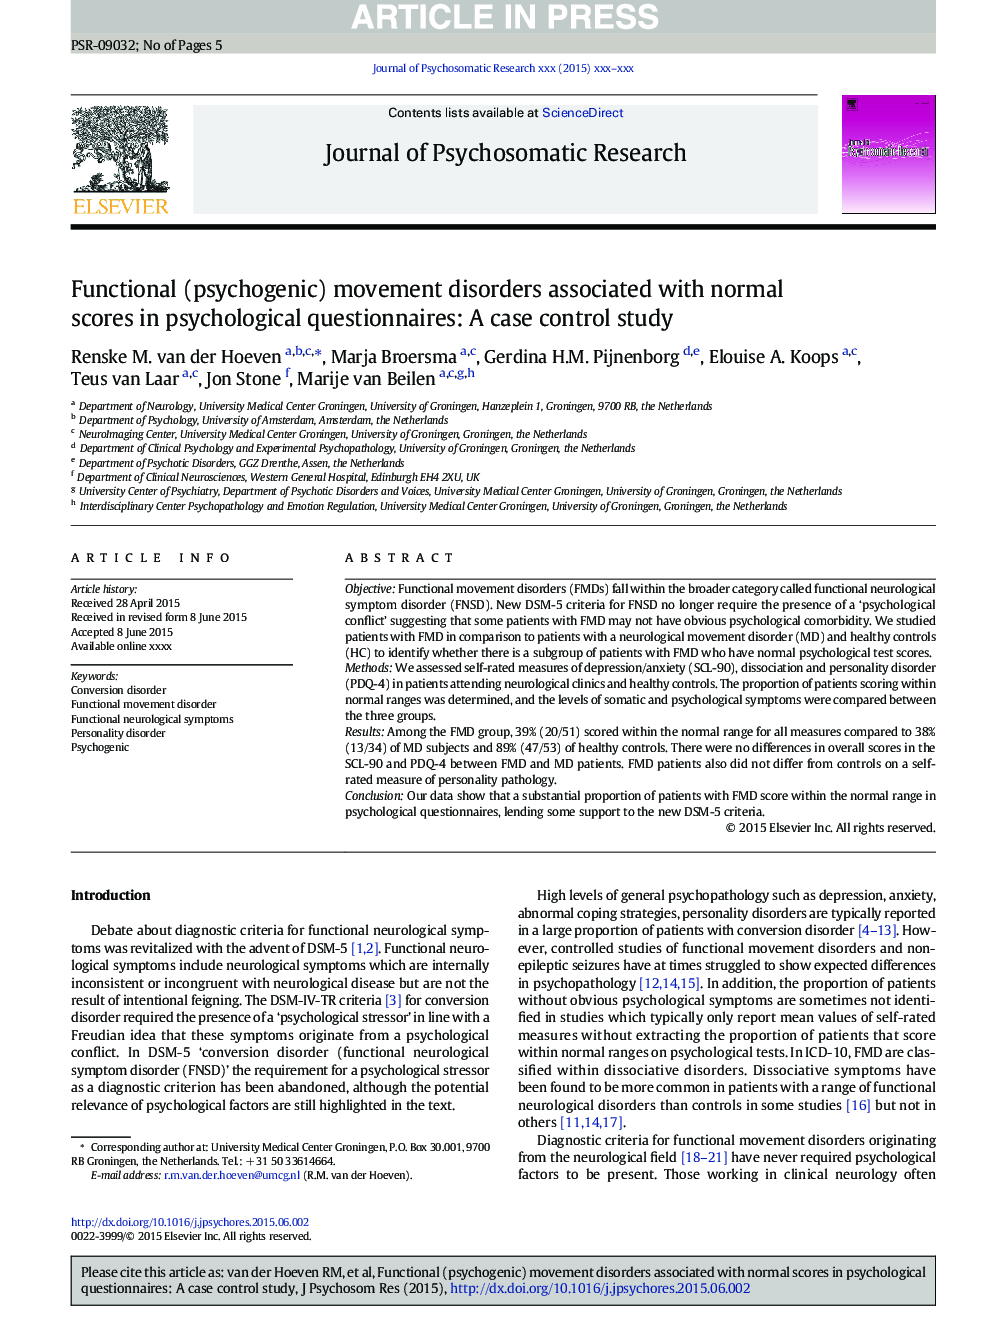 Functional (psychogenic) movement disorders associated with normal scores in psychological questionnaires: A case control study